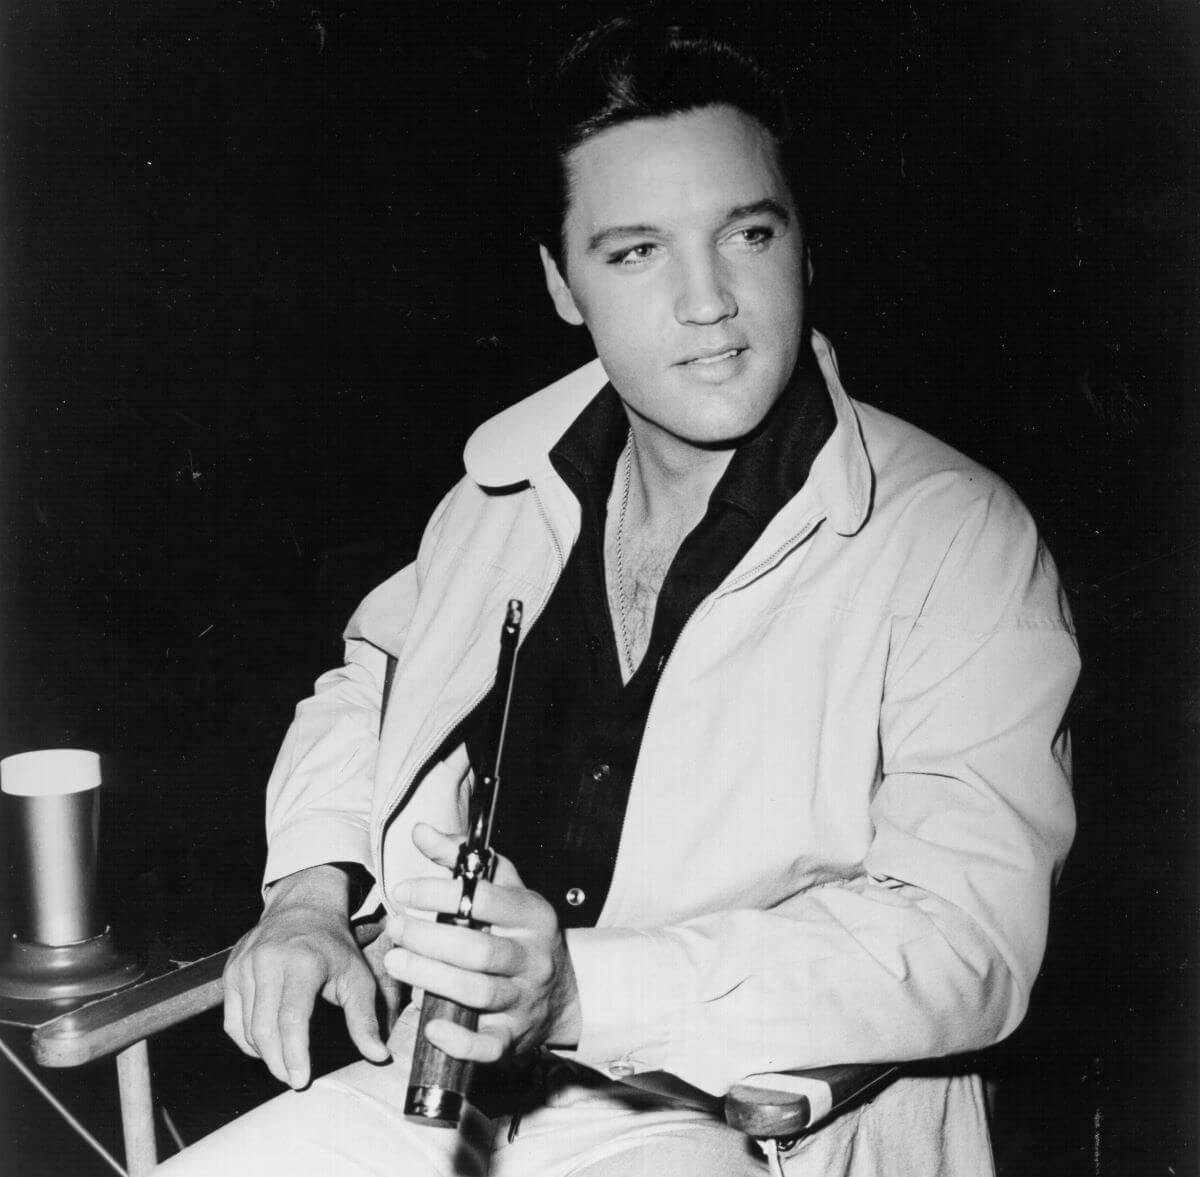 A black and white picture of Elvis Presley sitting in a chair and holding a gun in one hand.